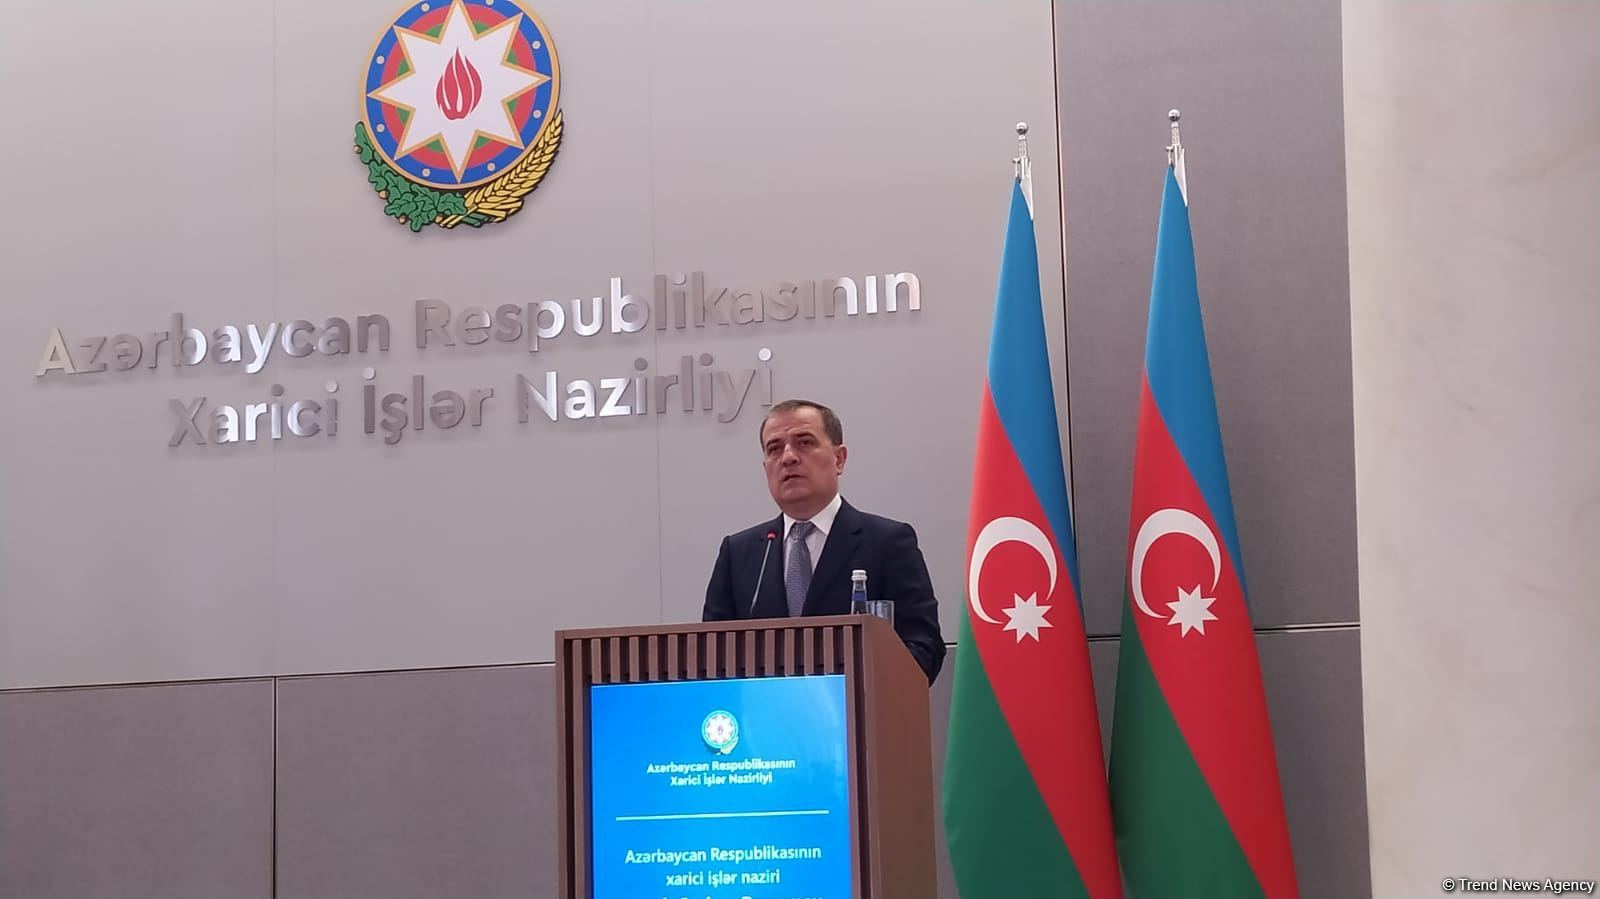 Unique opportunity emerges to normalize Azerbaijan-Armenia relations - FM